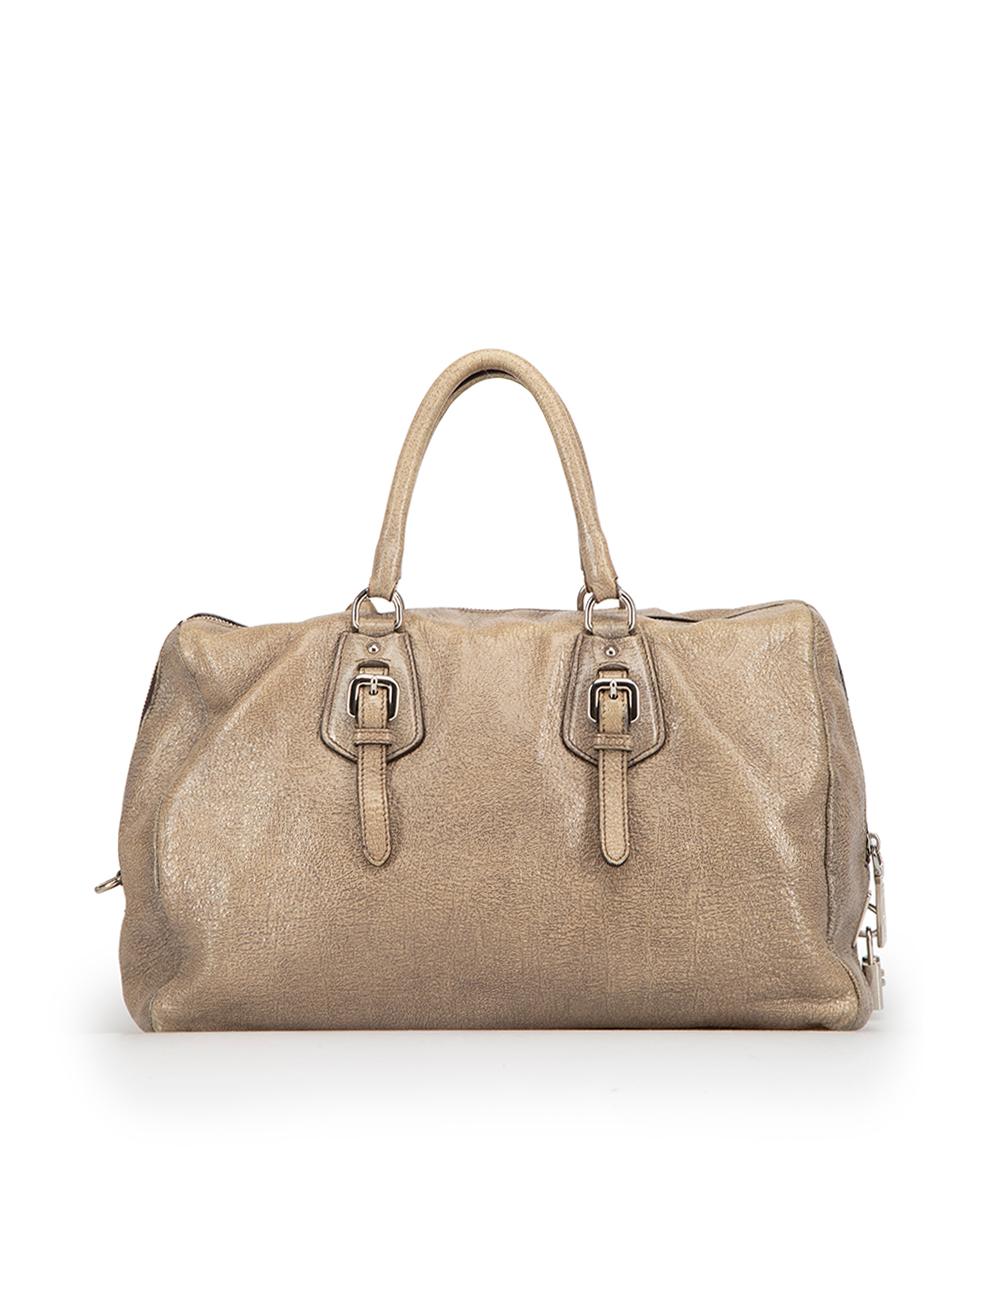 Prada Women's Taupe Deerskin Leather Cervo Lux Handbag In Good Condition For Sale In London, GB